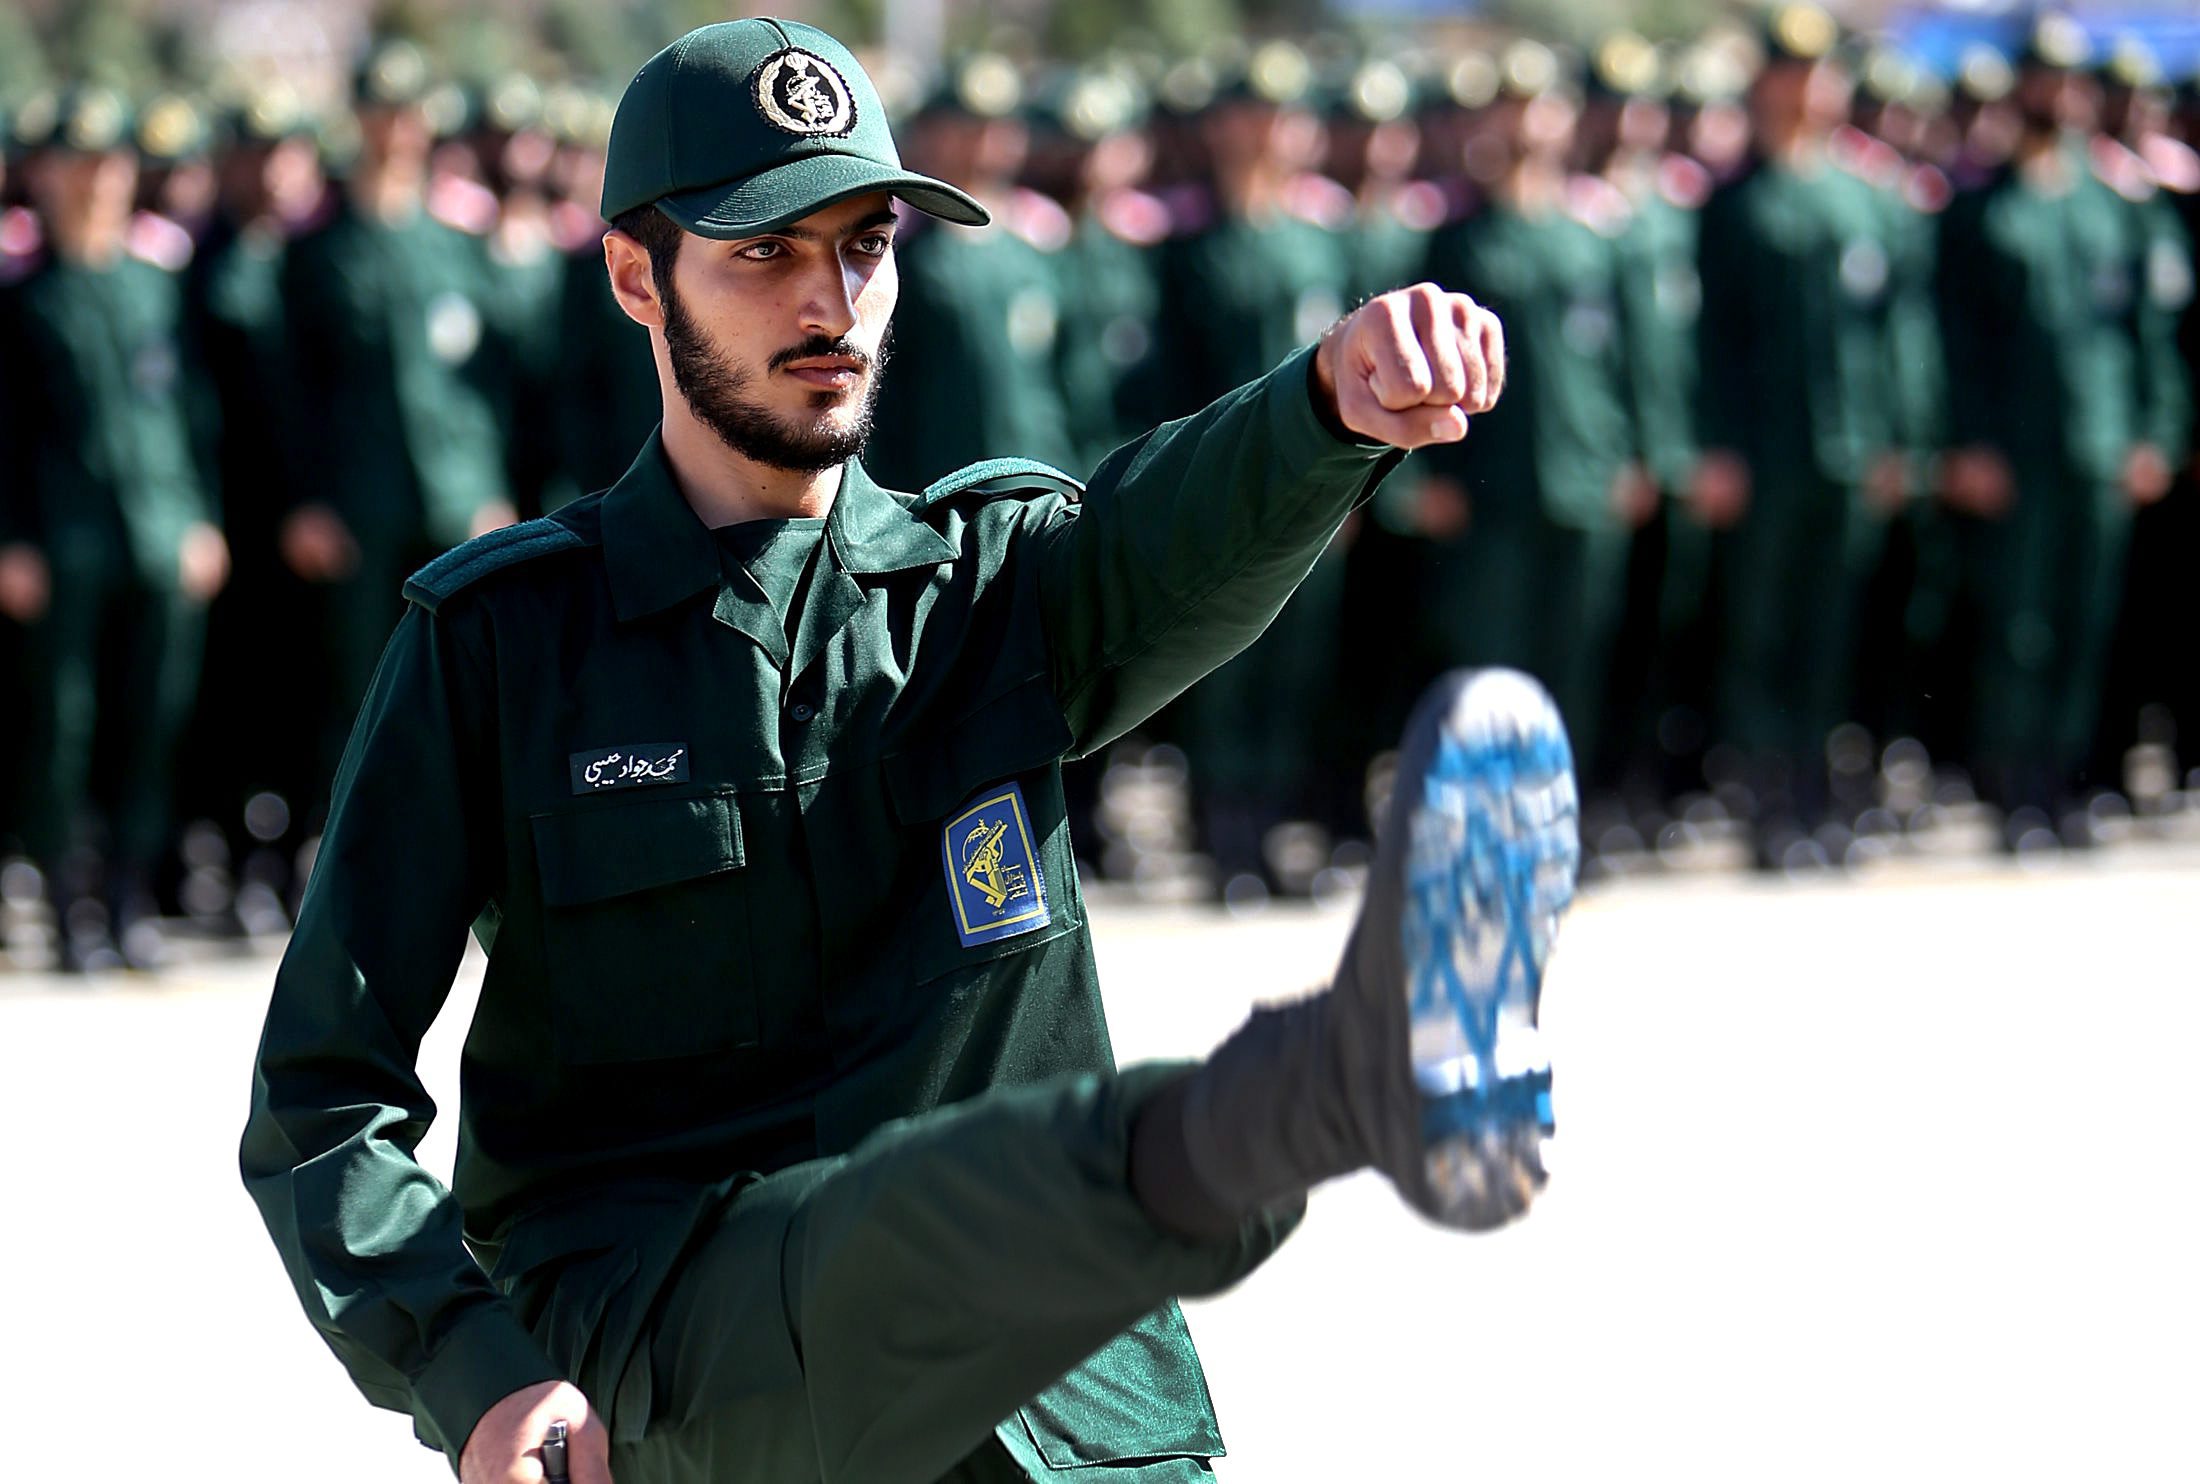 Iran’s Revolutionary Guard is listed terrorist group ‘by association,’ Canadian court rules